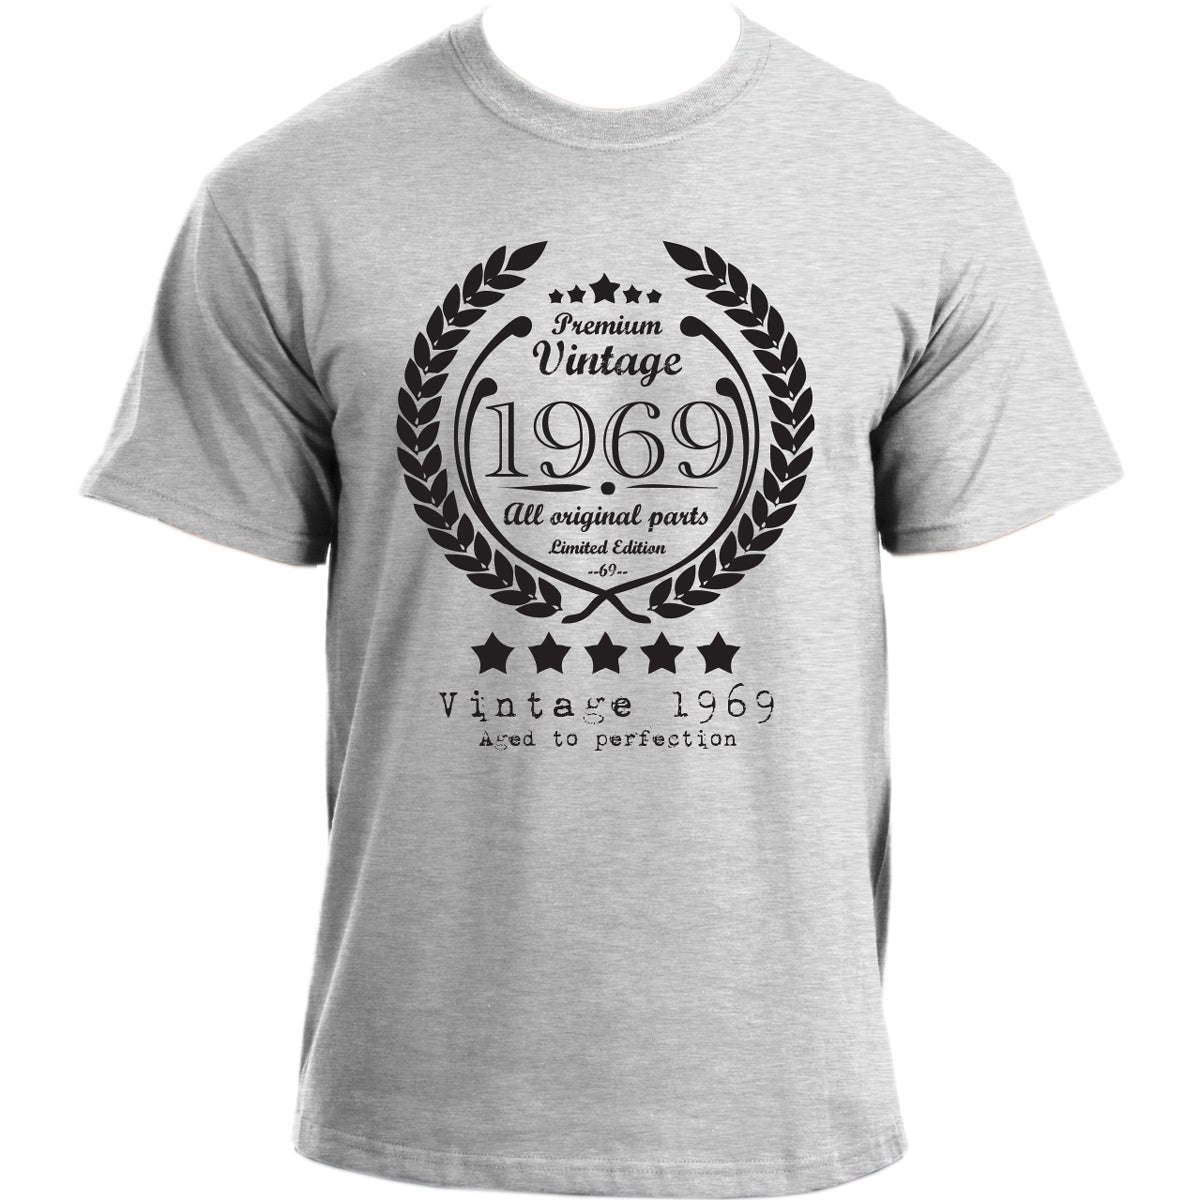 Premium Vintage 1969 Aged to Perfection Limited Edition Birthday Present Mens t-shirt